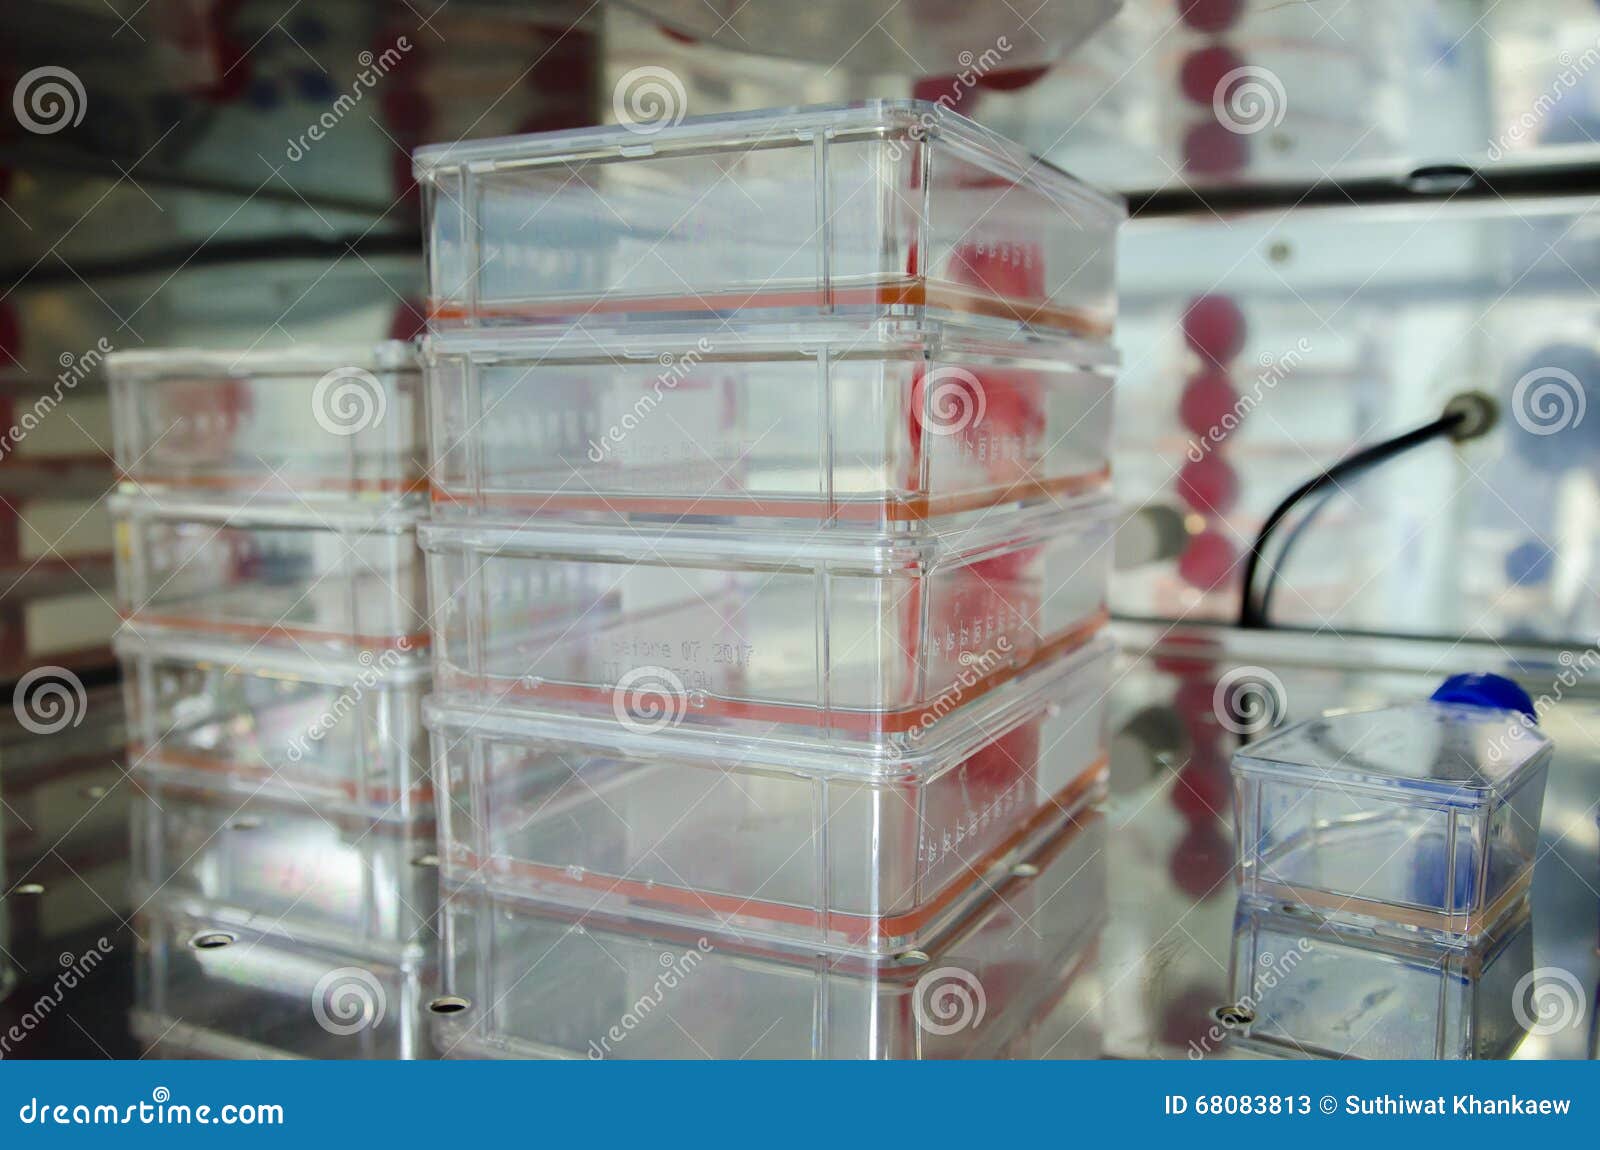 Animal cell culture stock image. Image of forensics, biotechnology -  68083813